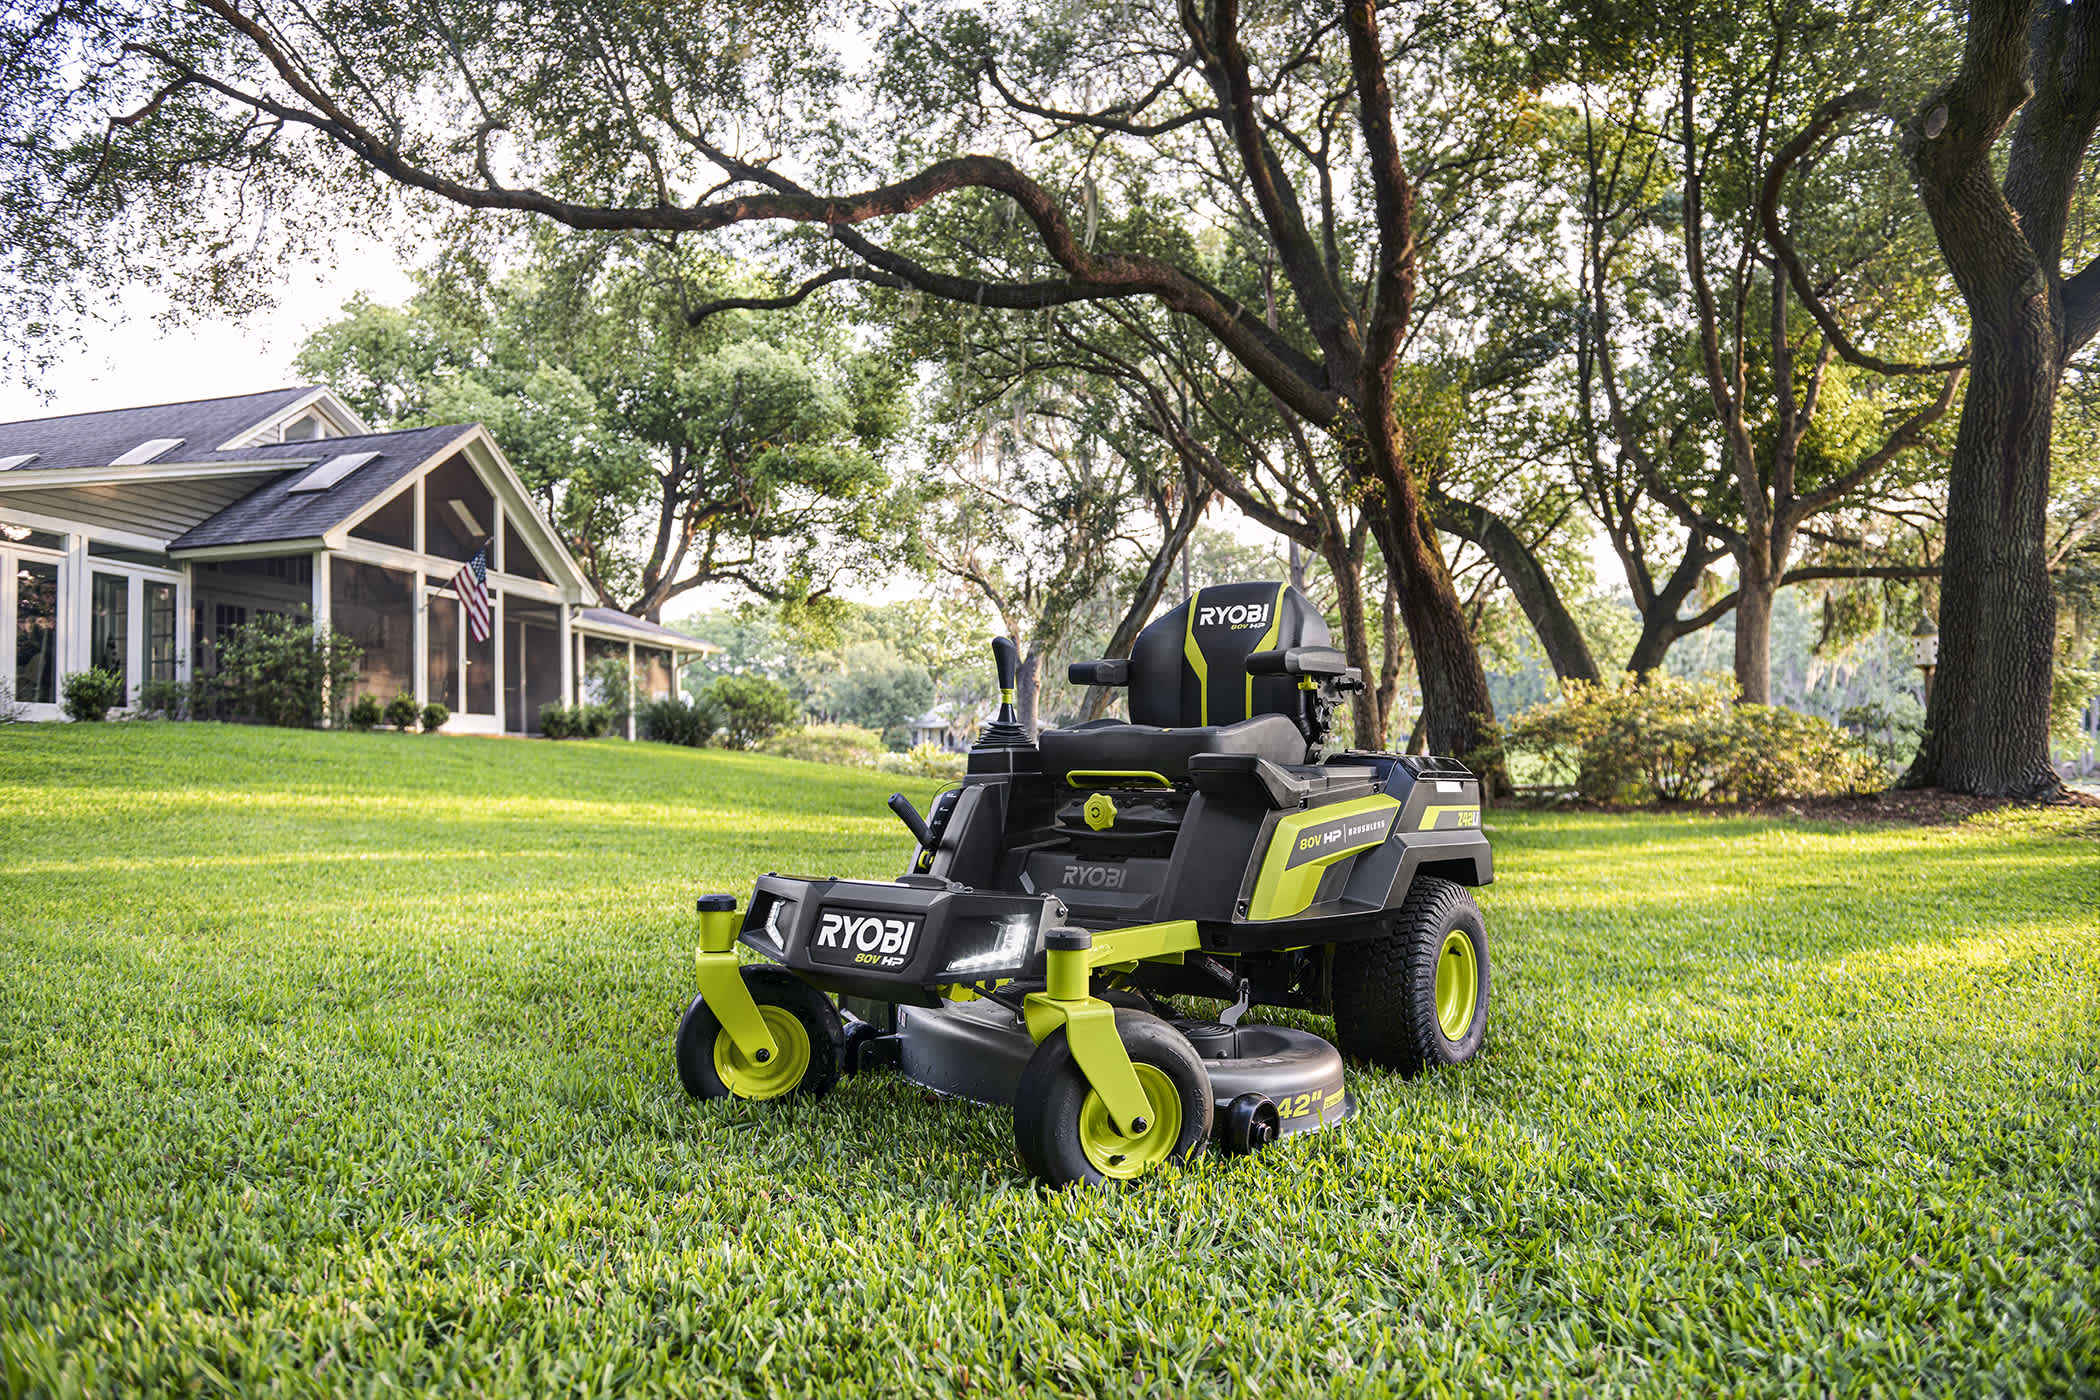 Product Features Image for 80V HP BRUSHLESS 42" LITHIUM ELECTRIC ZERO TURN RIDING MOWER.